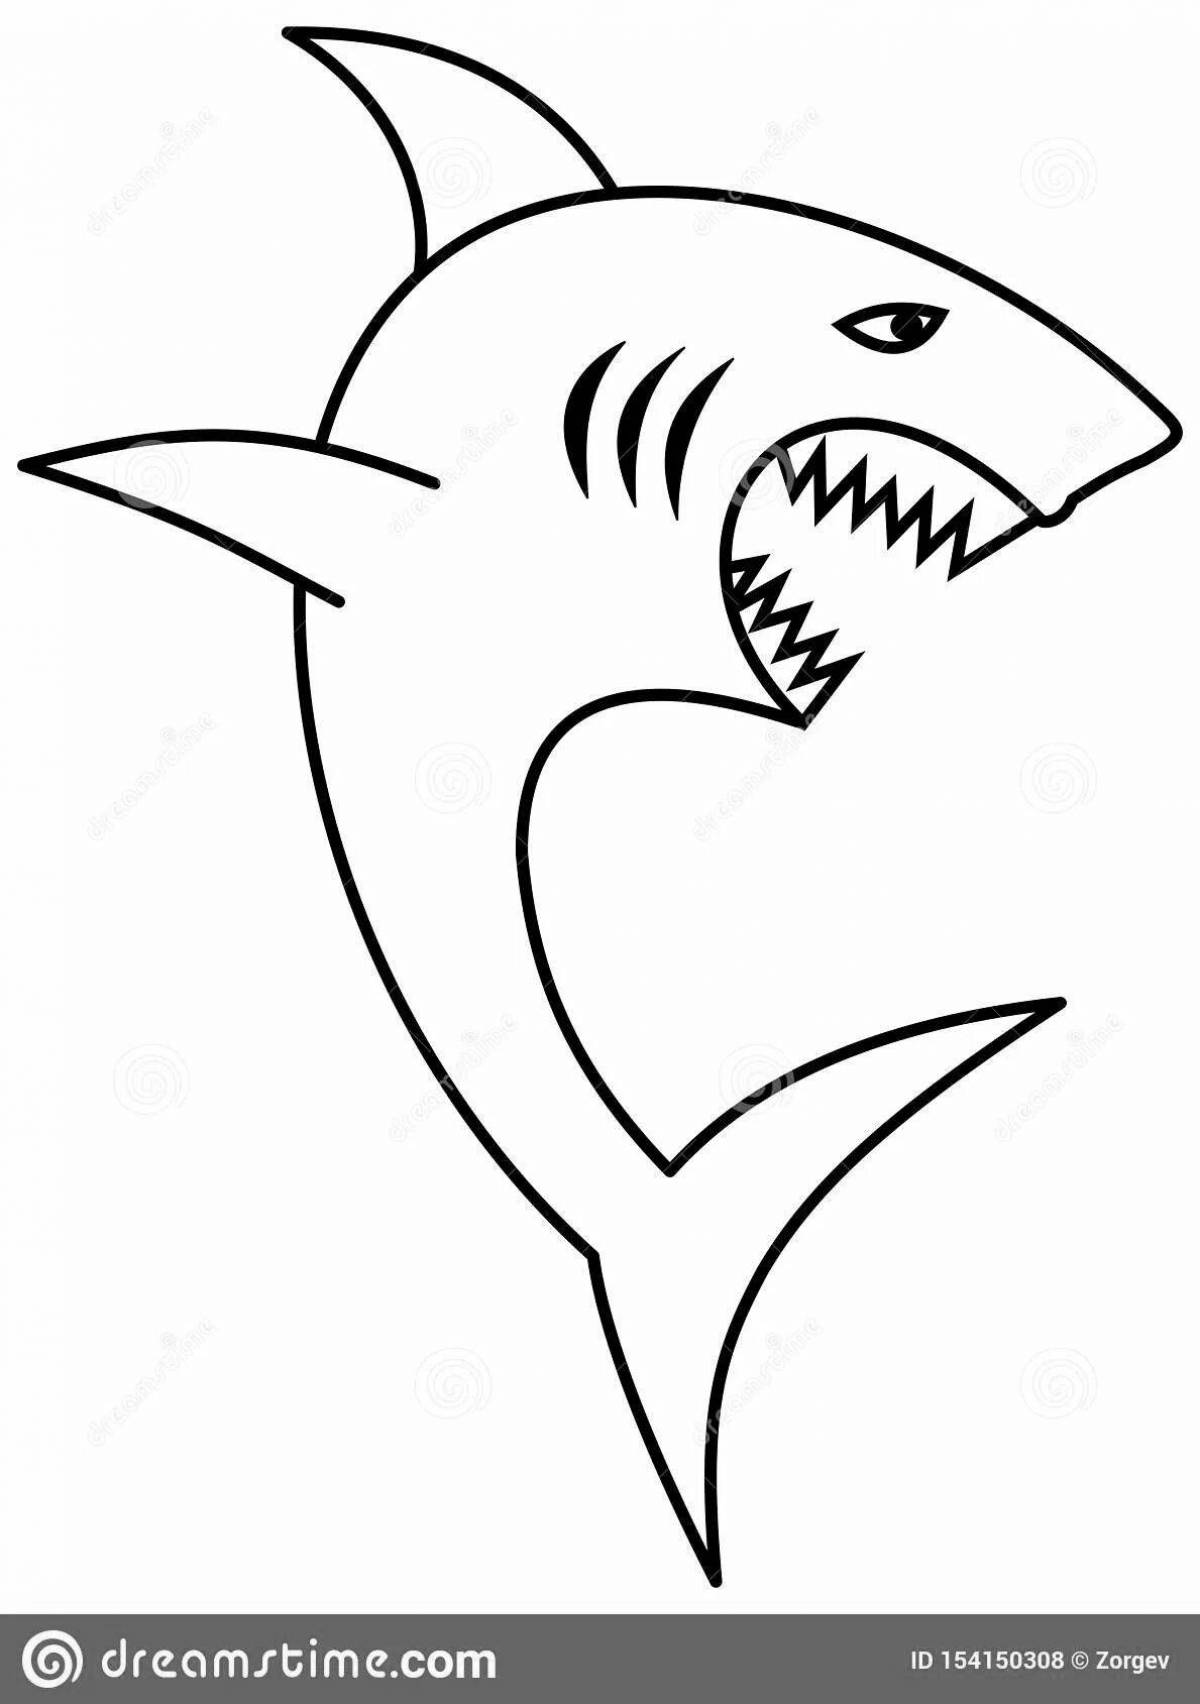 Innovative megalodon coloring book for kids